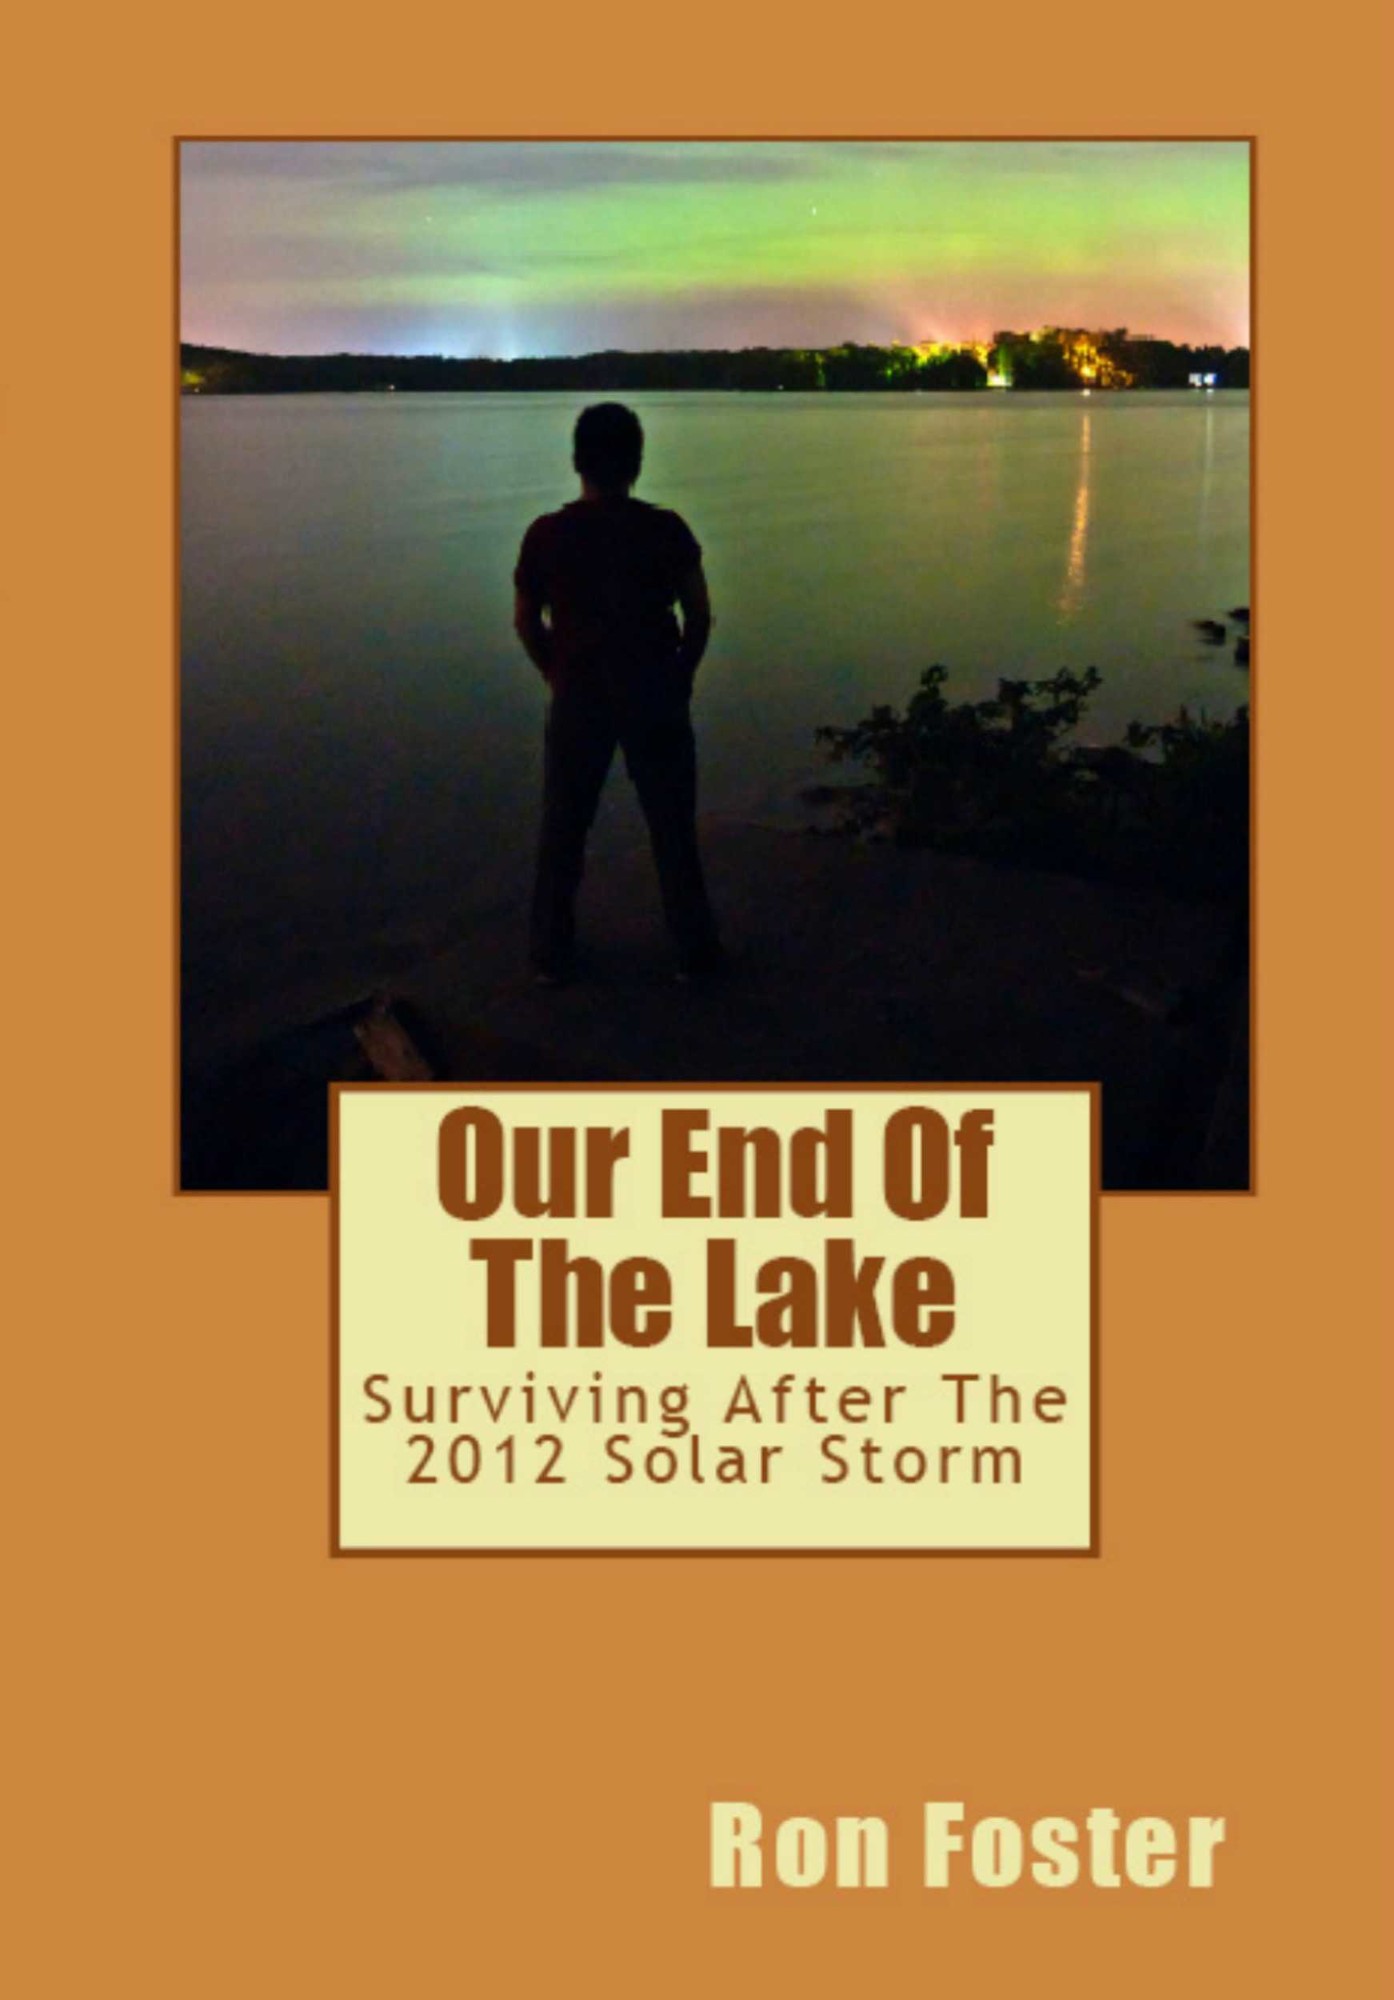 Our End Of The Lake: Surviving After The 2012 Solar Storm (Prepper Trilogy) by Ron Foster